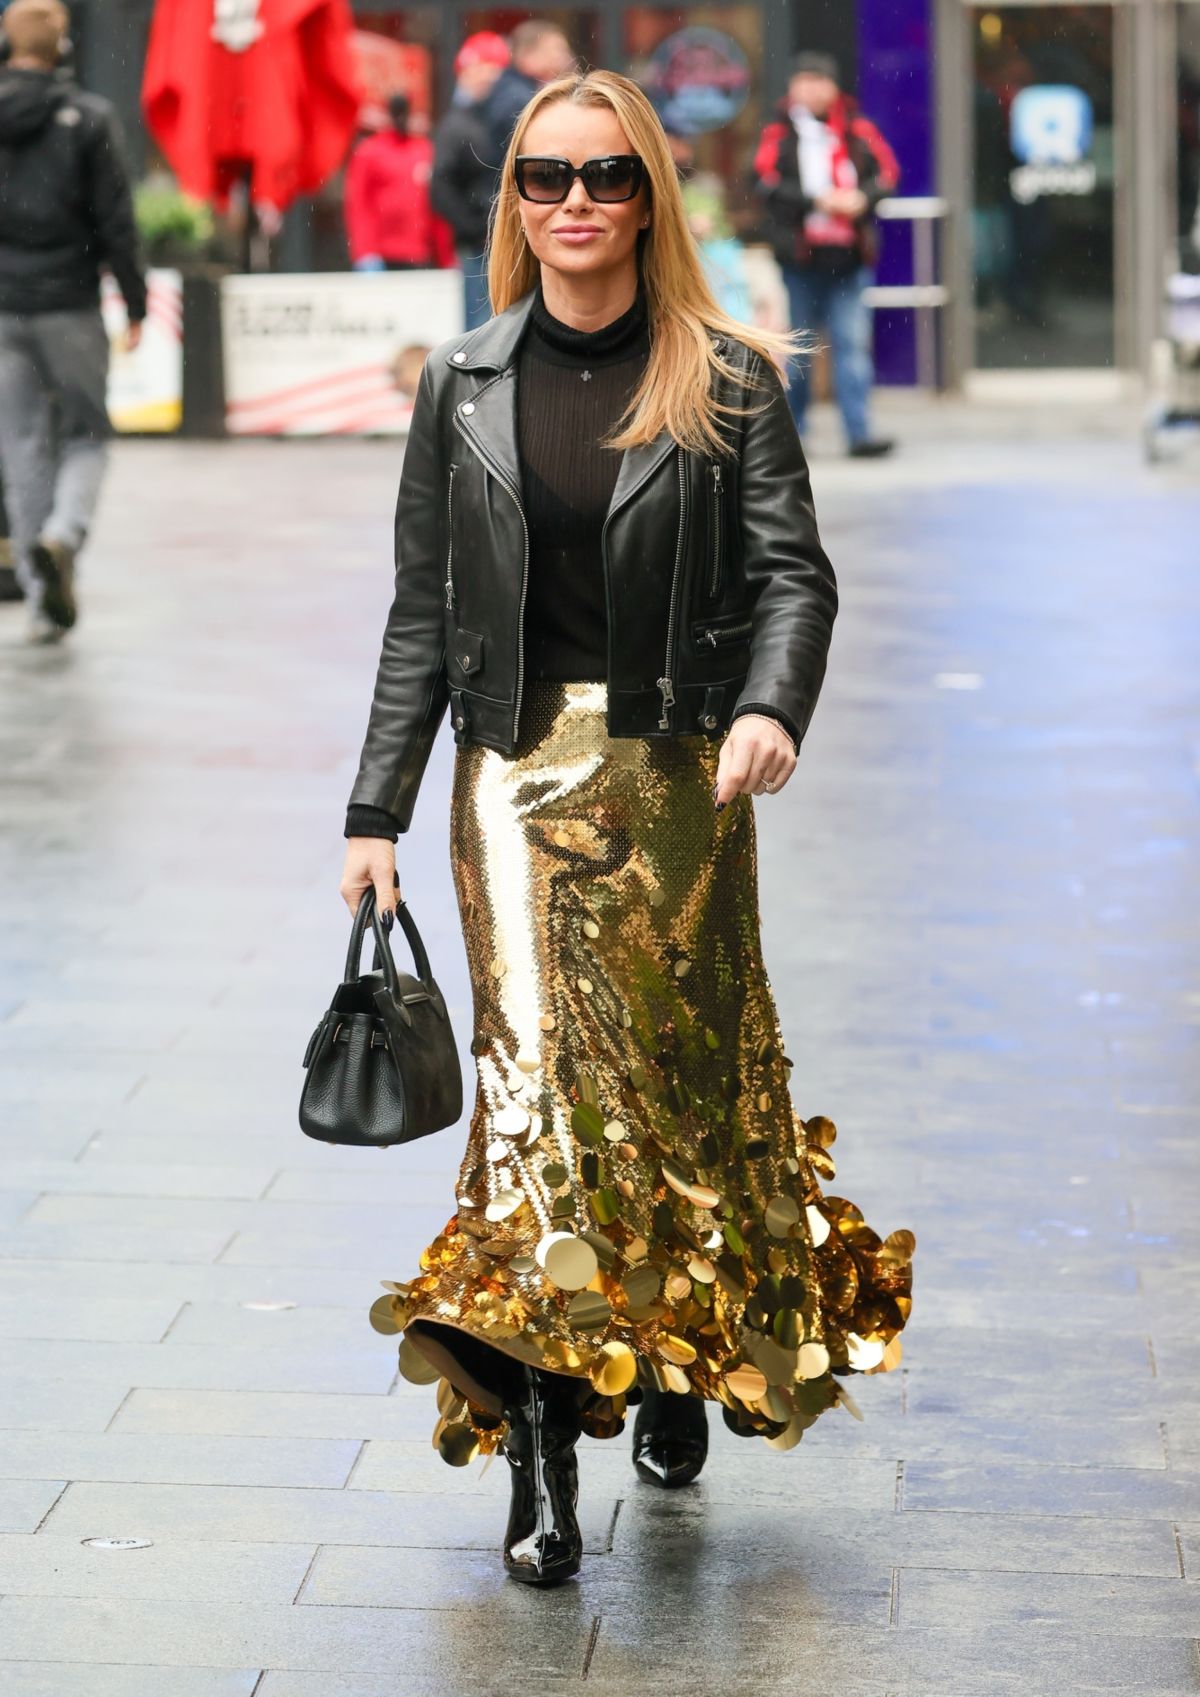 Amanda Holden stuns in chic black and golden outfit at Heart Radio London 1